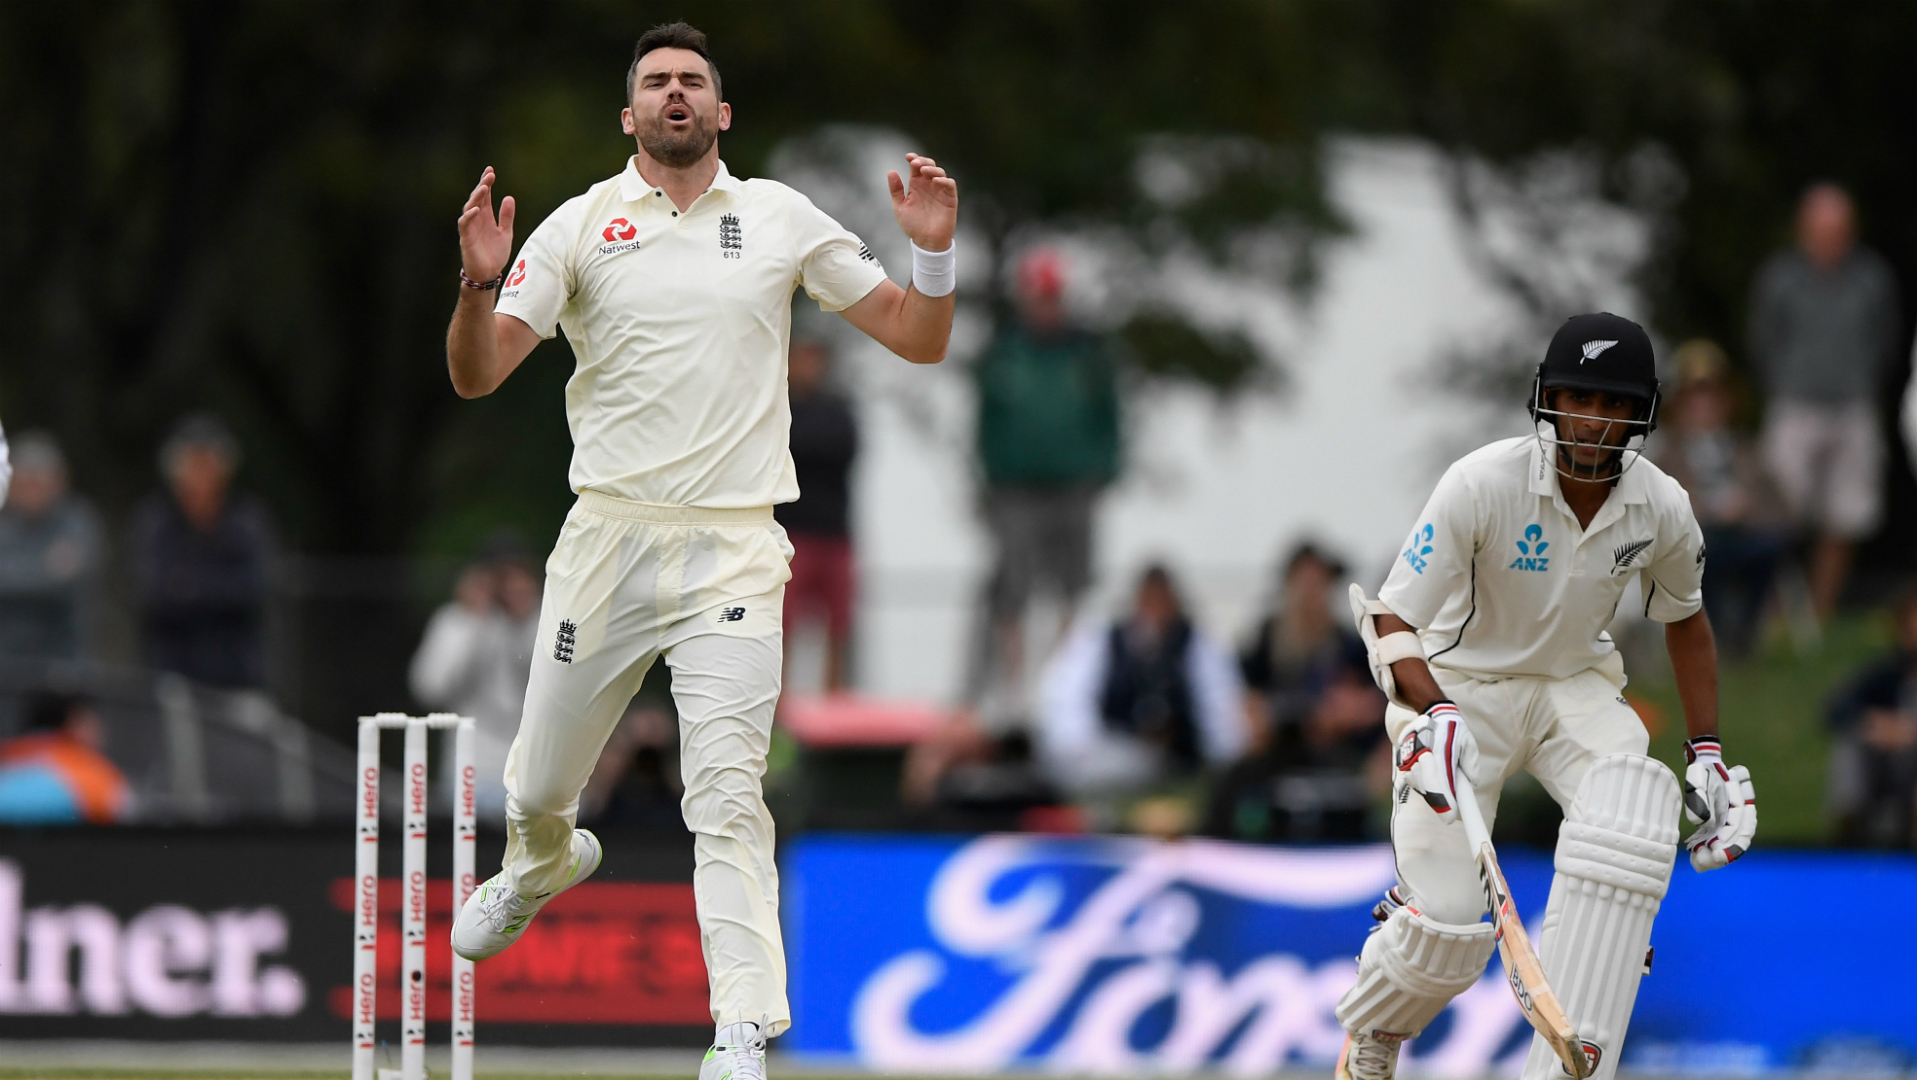 Bad light was England's worst enemy as New Zealand made it to 42-0 at stumps on day four of the second Test, requiring 340 runs to win.